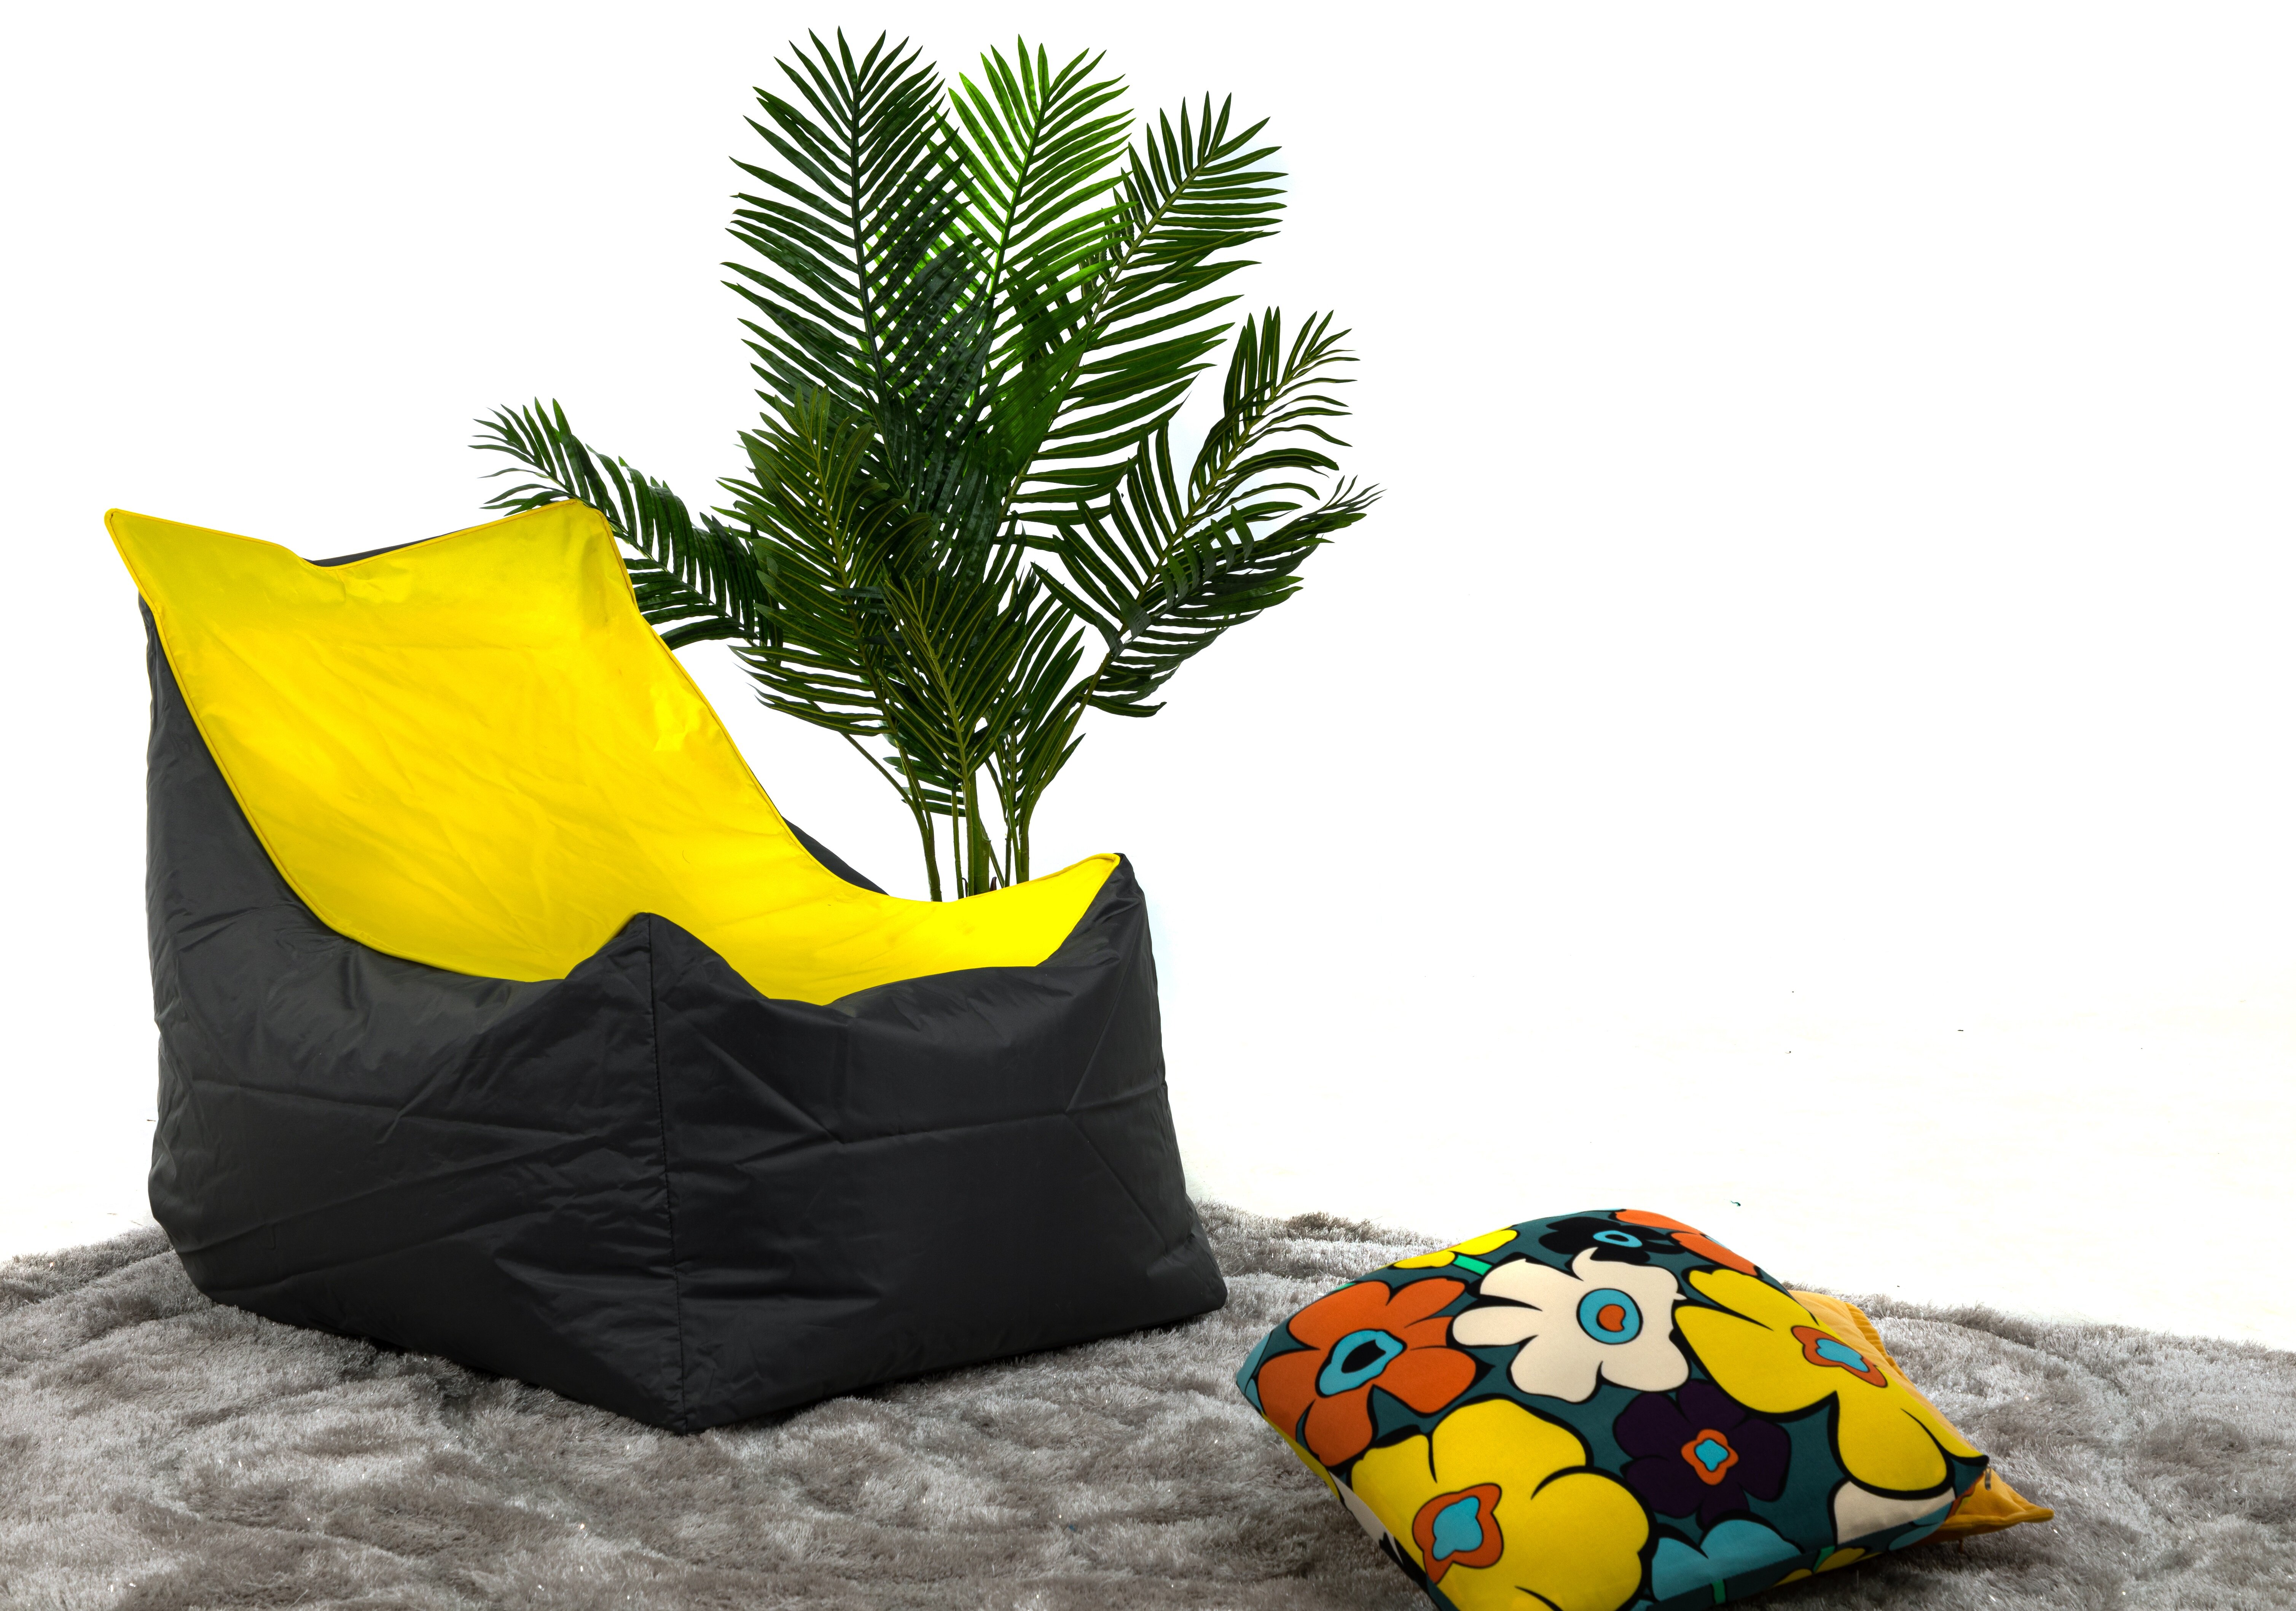 All you need to know about choosing a bean bag in the right way